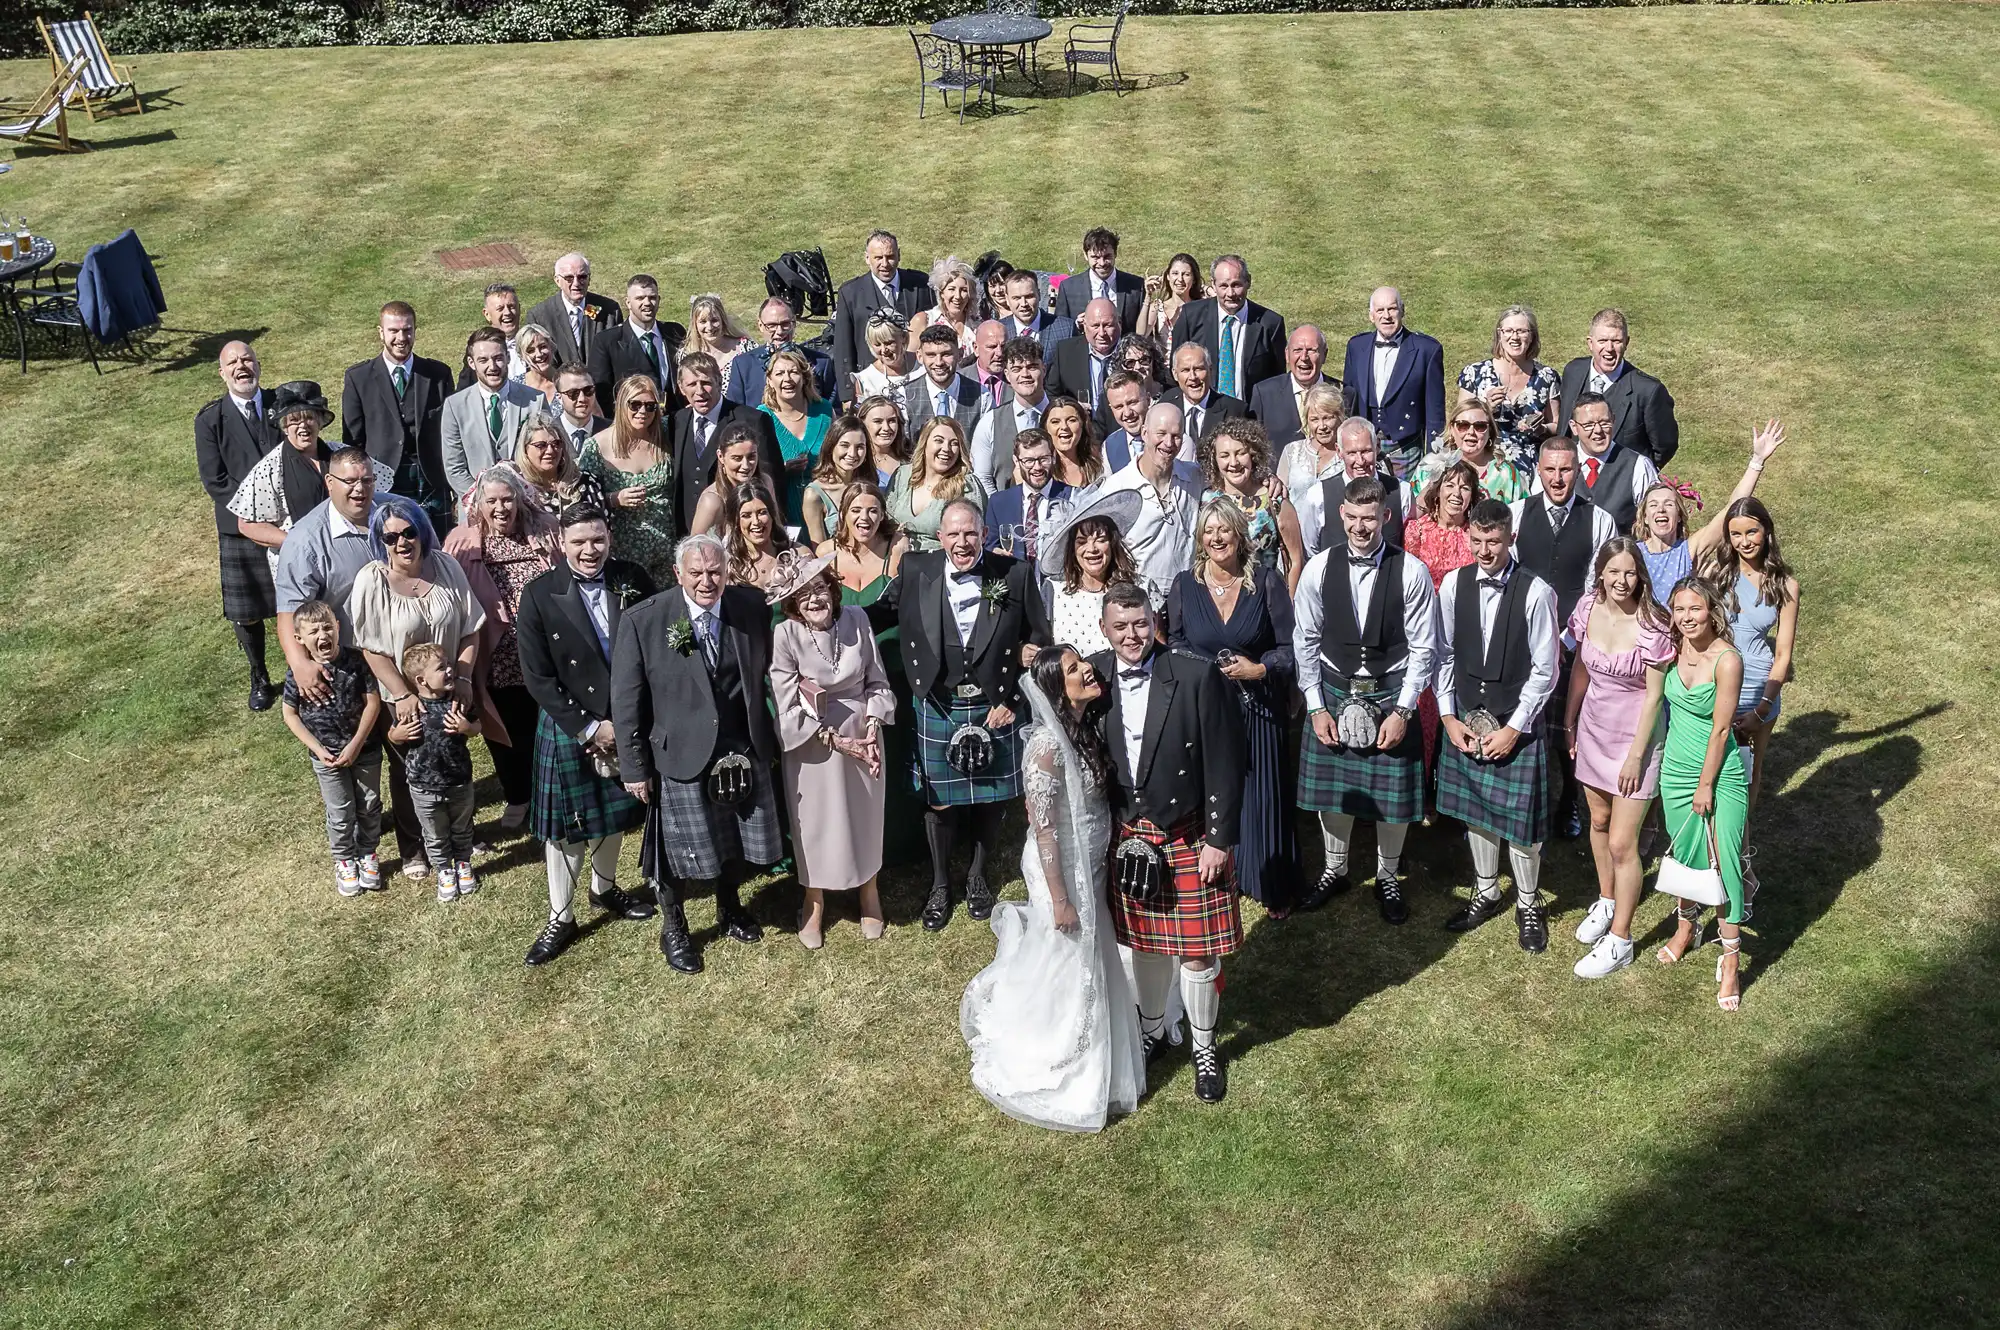 A large wedding group, including guests in suits and kilts, posing outdoors on a lawn with the bride and groom at the center.